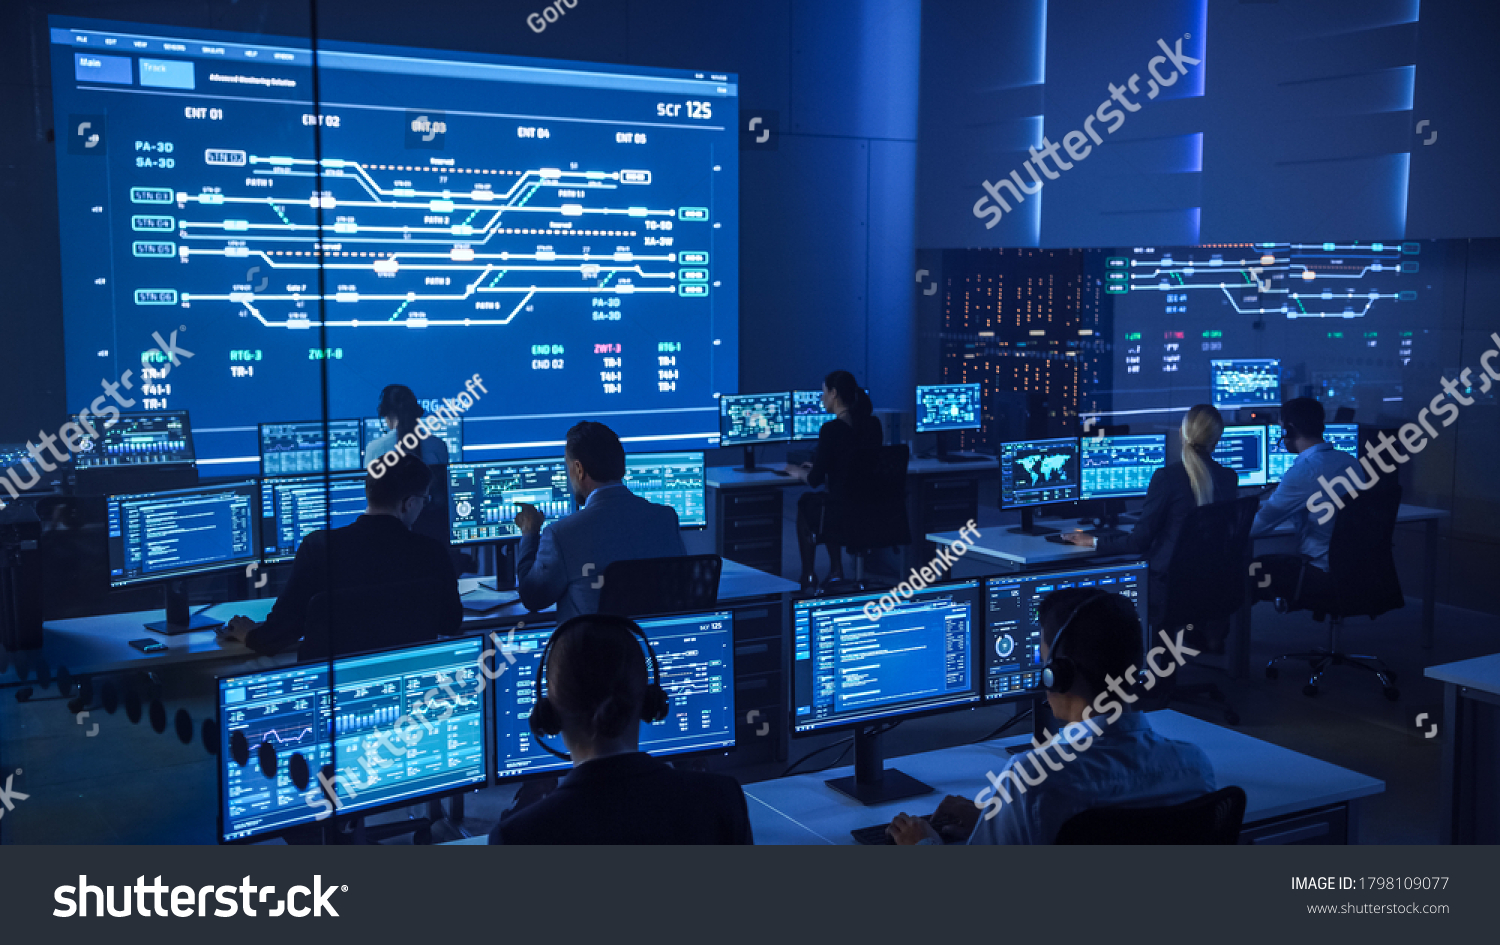 Team of Professional Computer Data Science Engineers Work on Desktops with Screens Showing Charts, Graphs, Infographics, Technical Neural Data and Statistics. Low Key Control and Monitoring Room. #1798109077